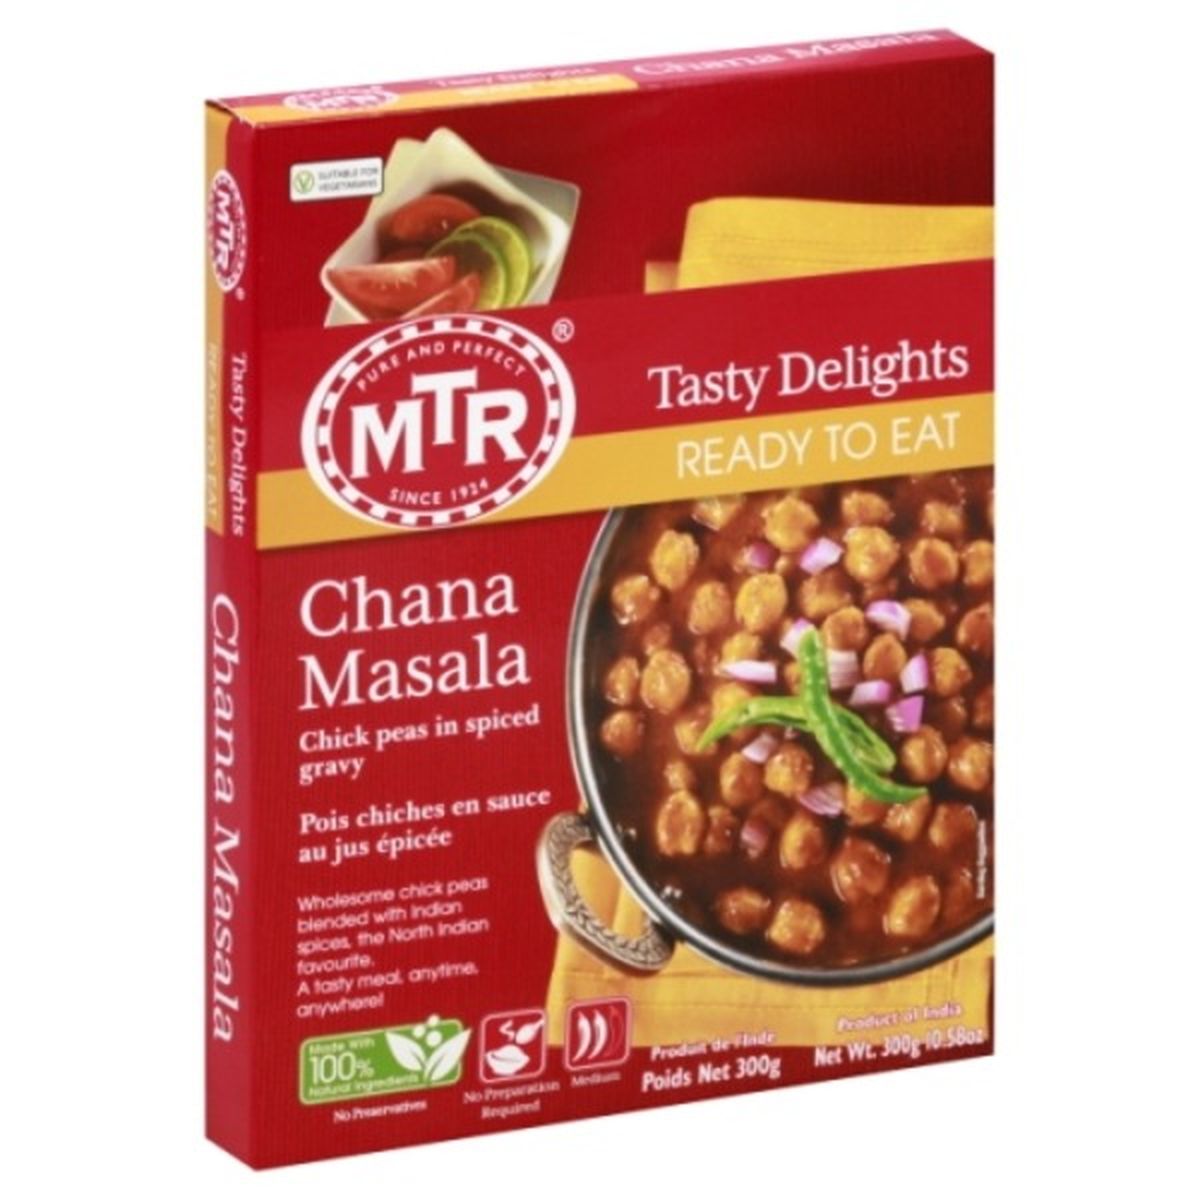 Calories in MTR Tasty Delights Chana Masala, Ready to Eat